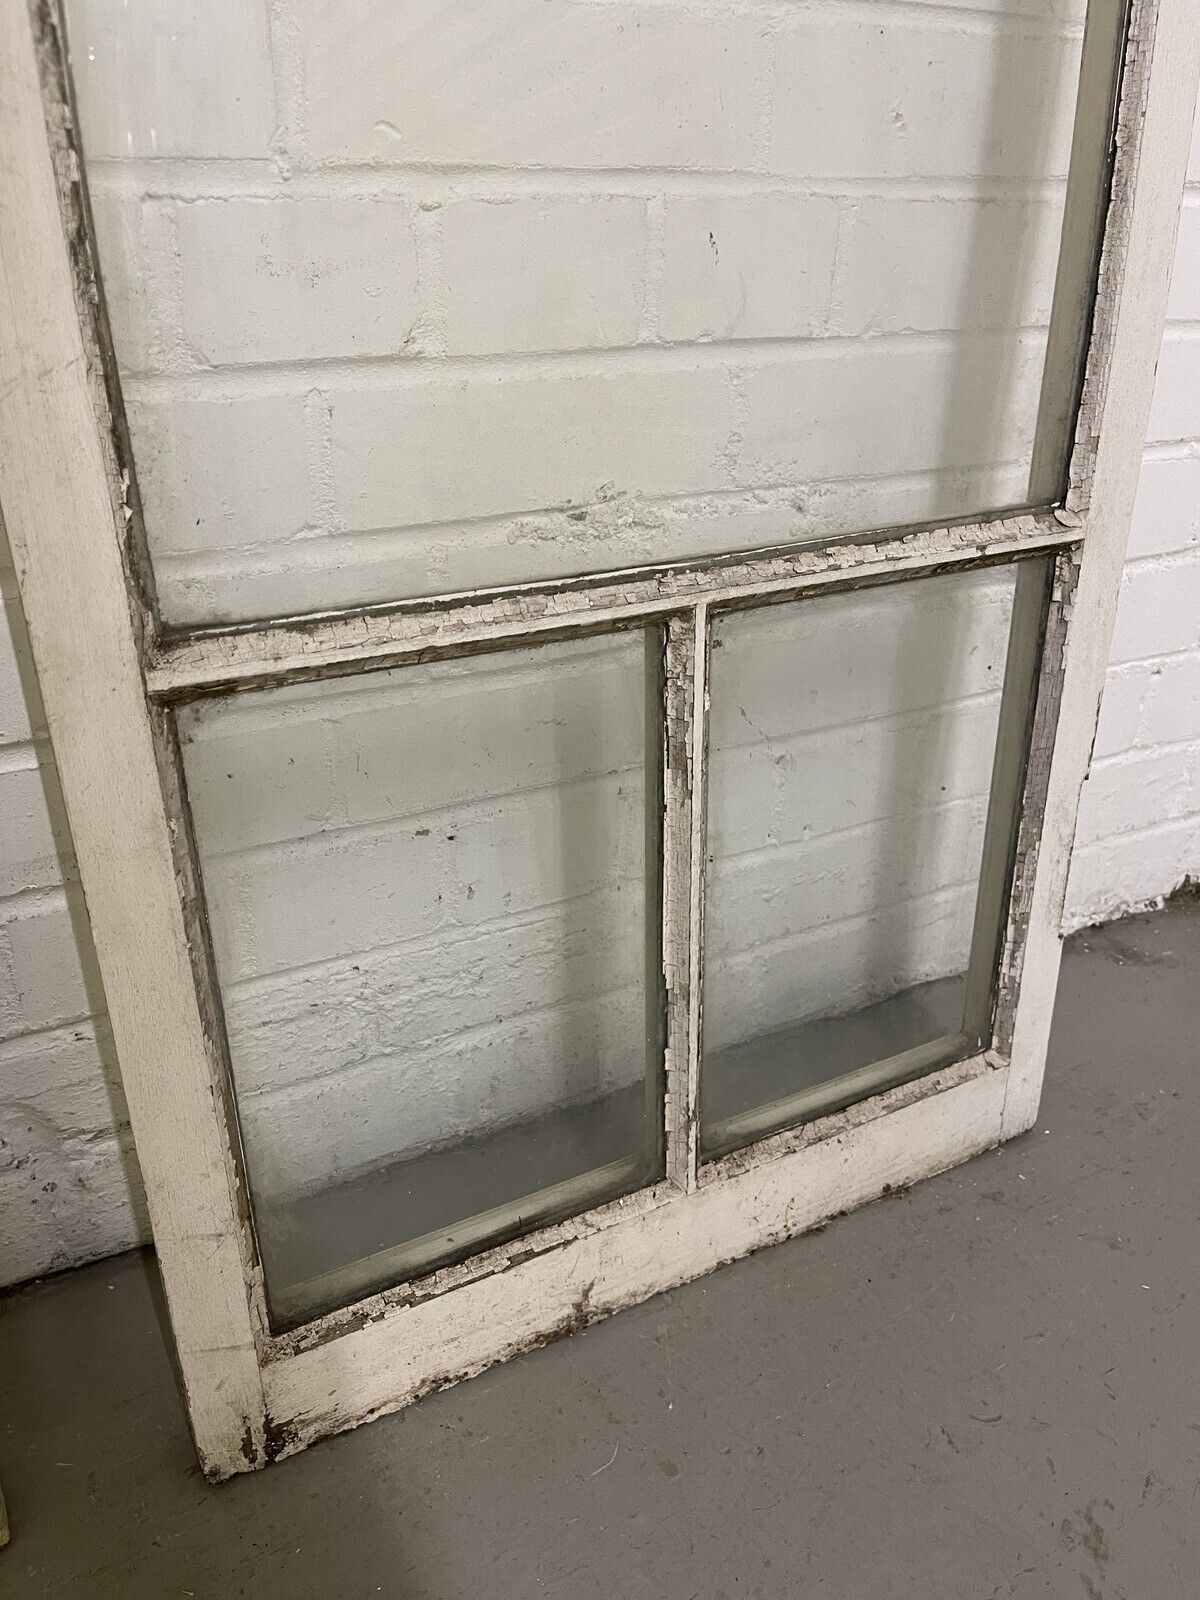 Pair Of Reclaimed Edwardian French Wooden Panel Windows 1512 x 532 1512 x 532mm